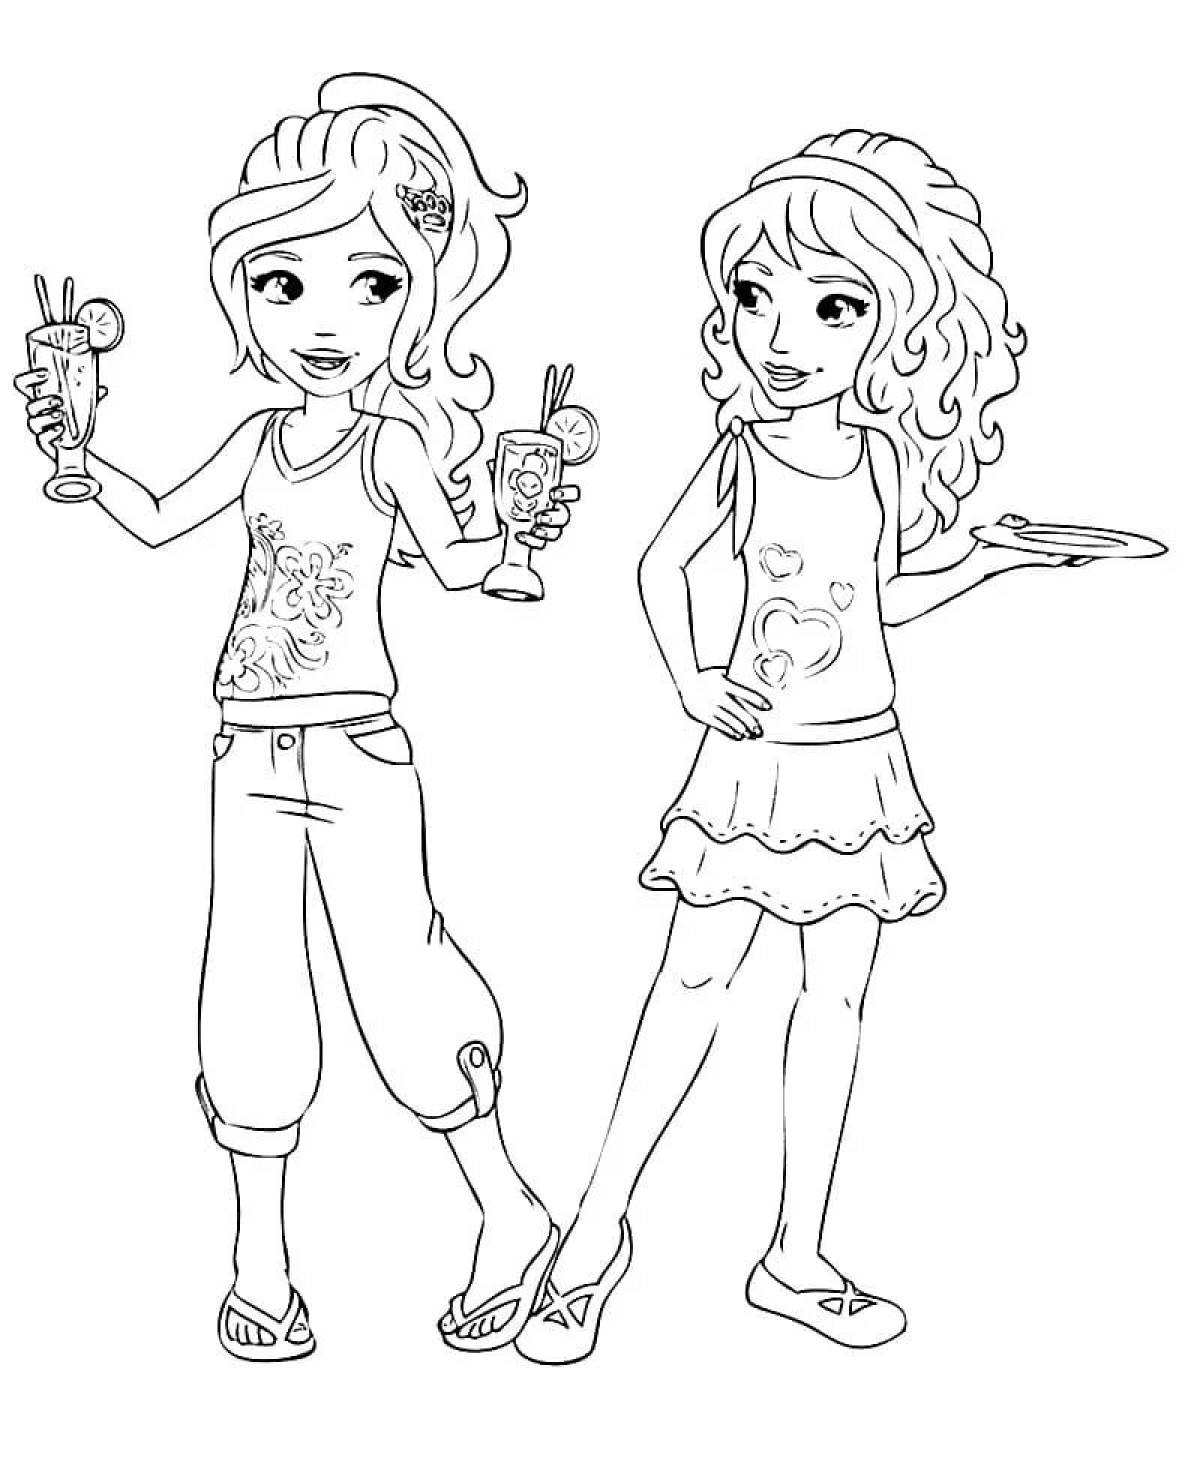 Adorable coloring book for girls and girlfriends